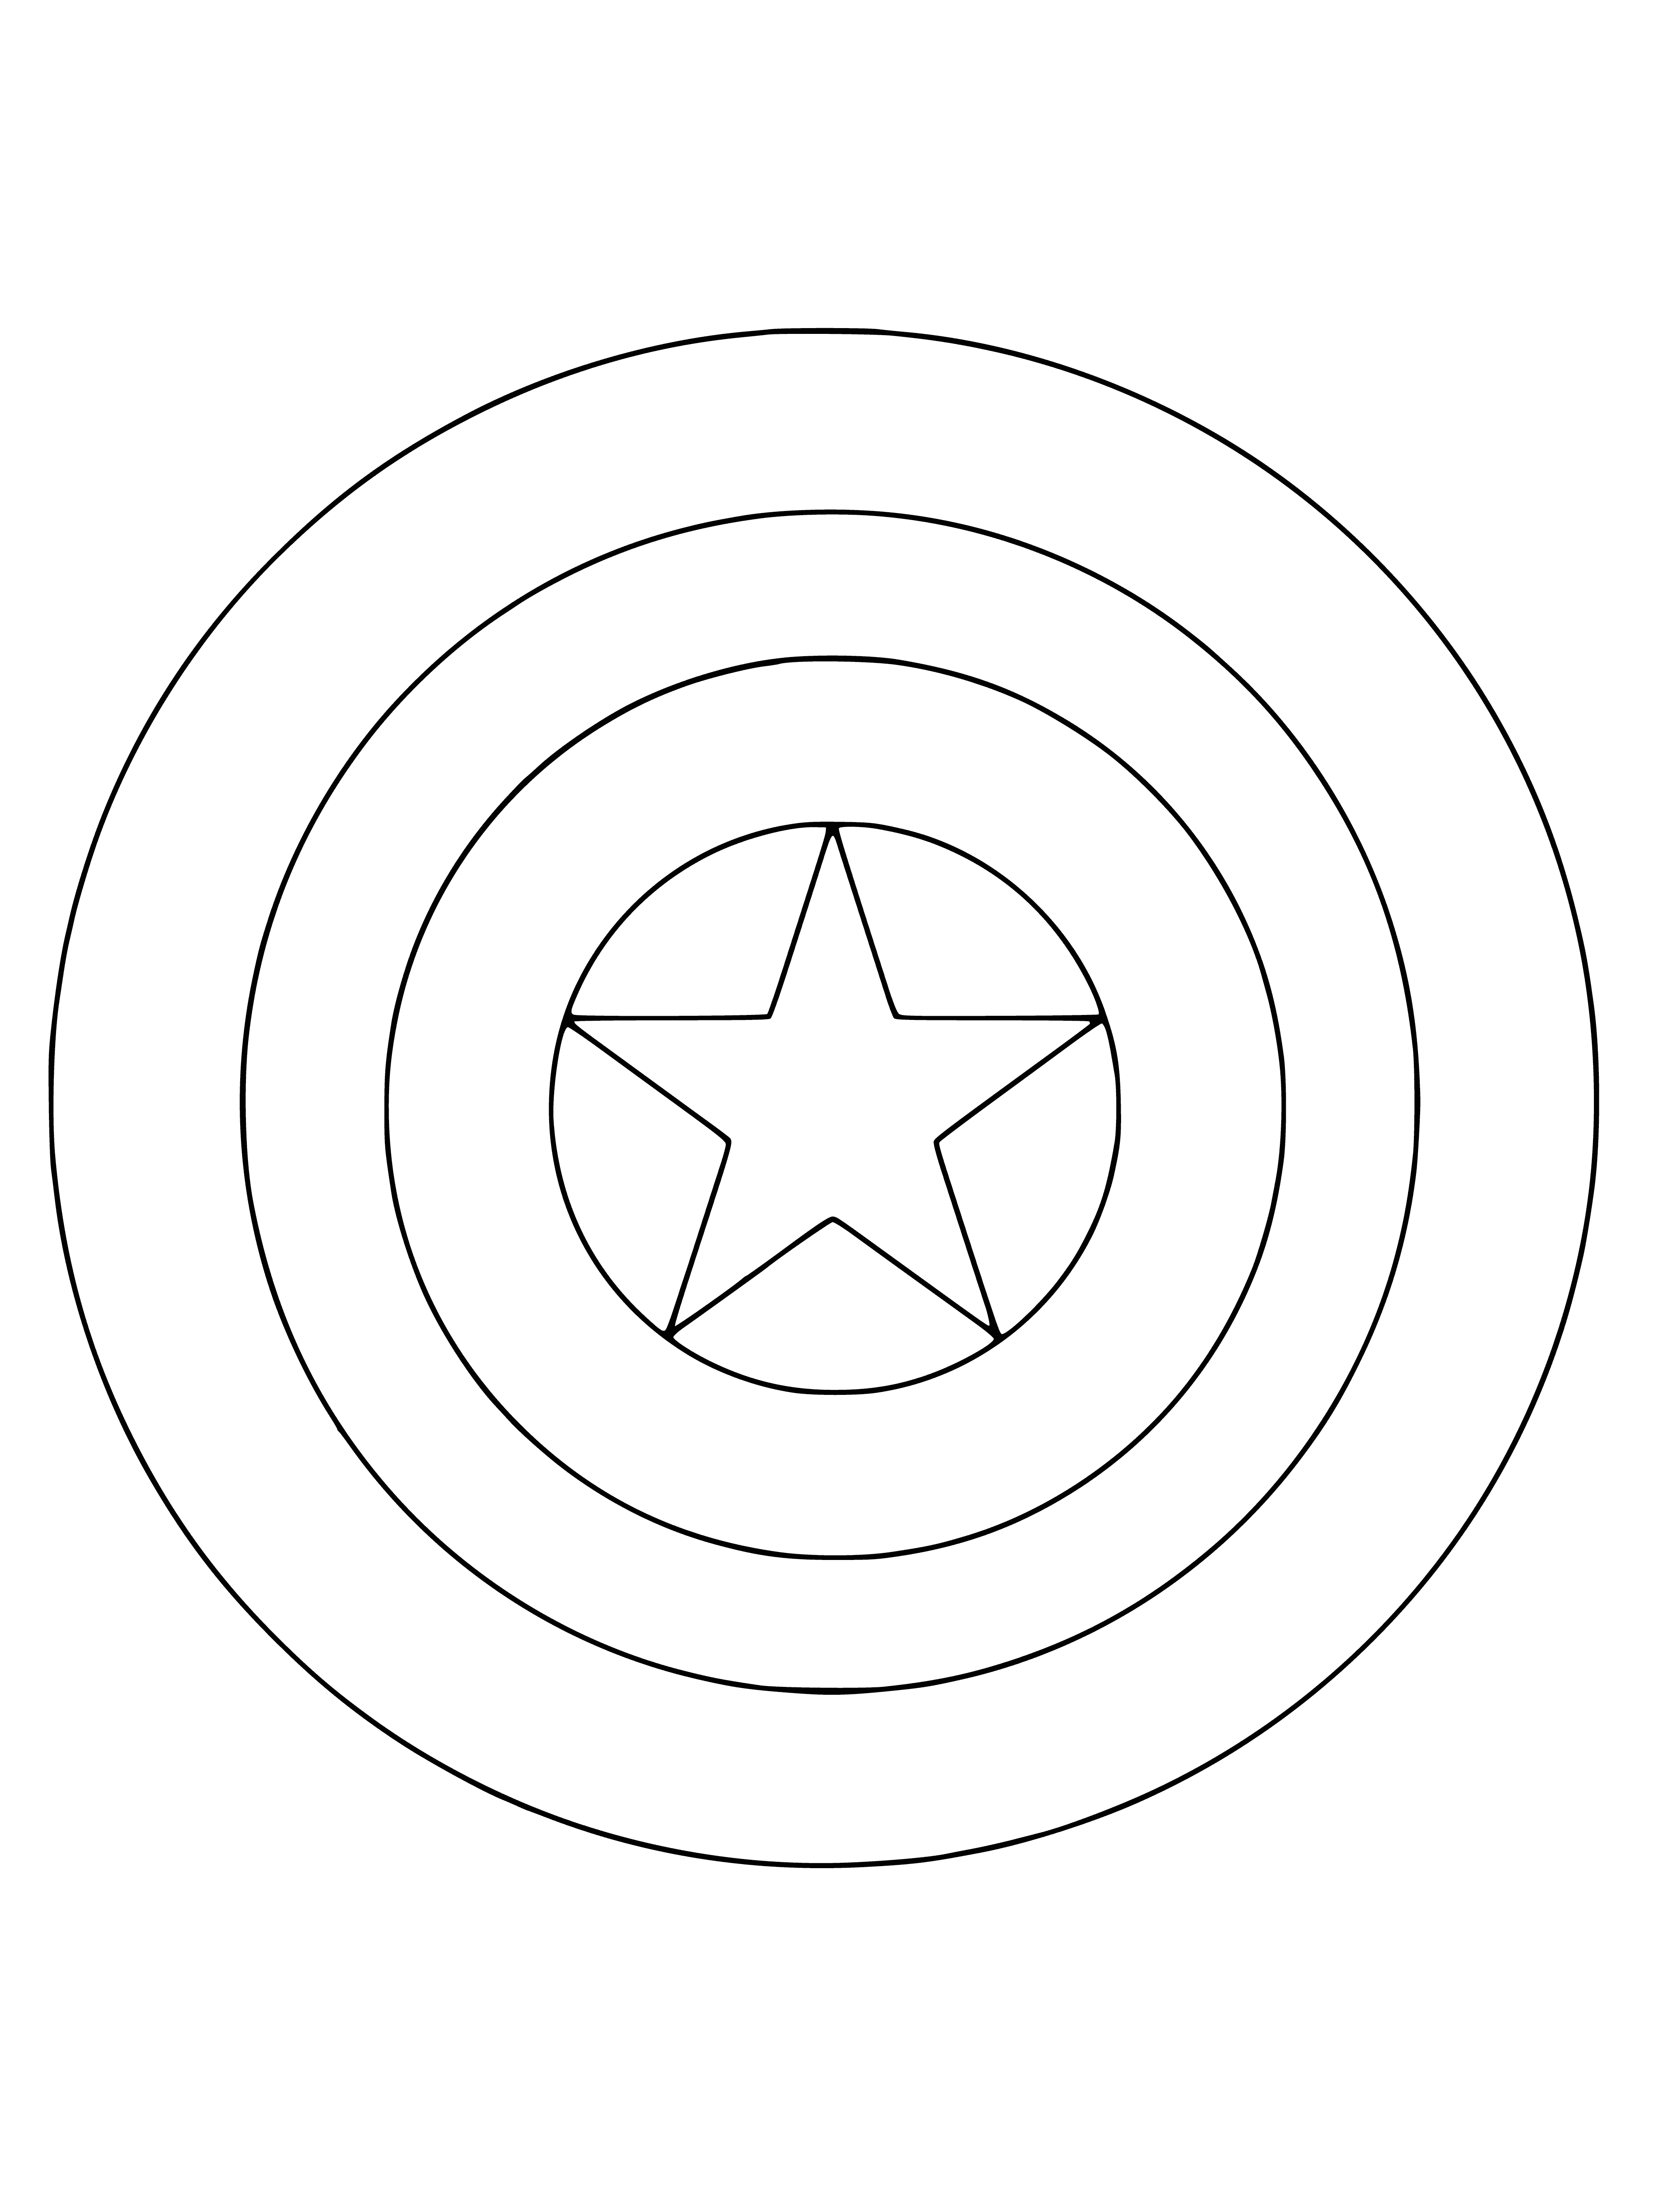 coloring page: Texas' state flag: white 5-point star on red background, 3 white, blue, white stripes in middle; thin white stripe at bottom.